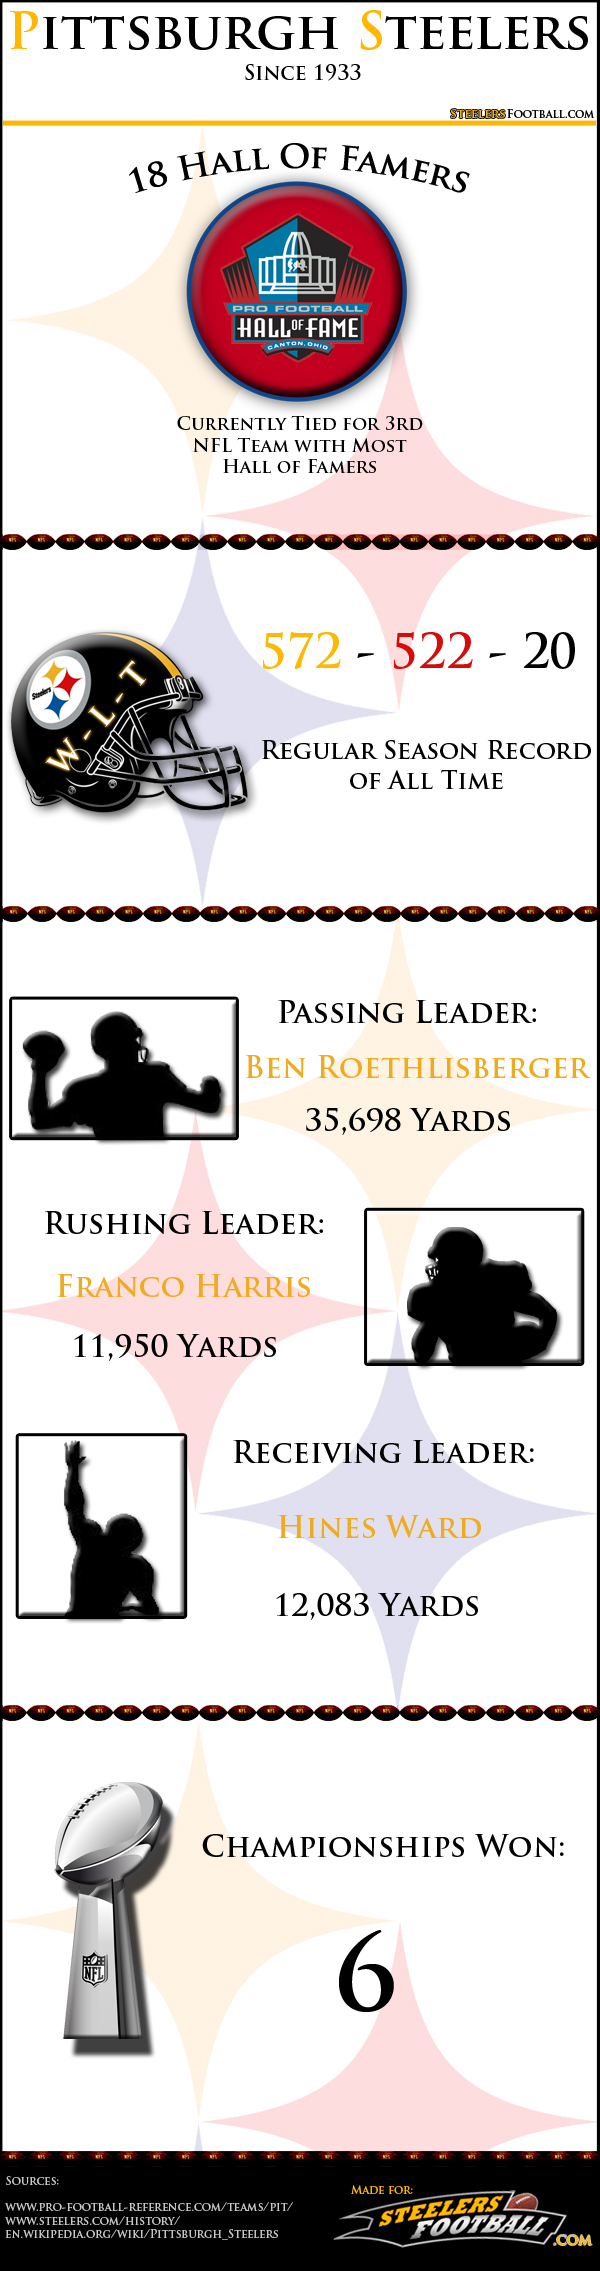 Pittsburgh Steelers Infographic